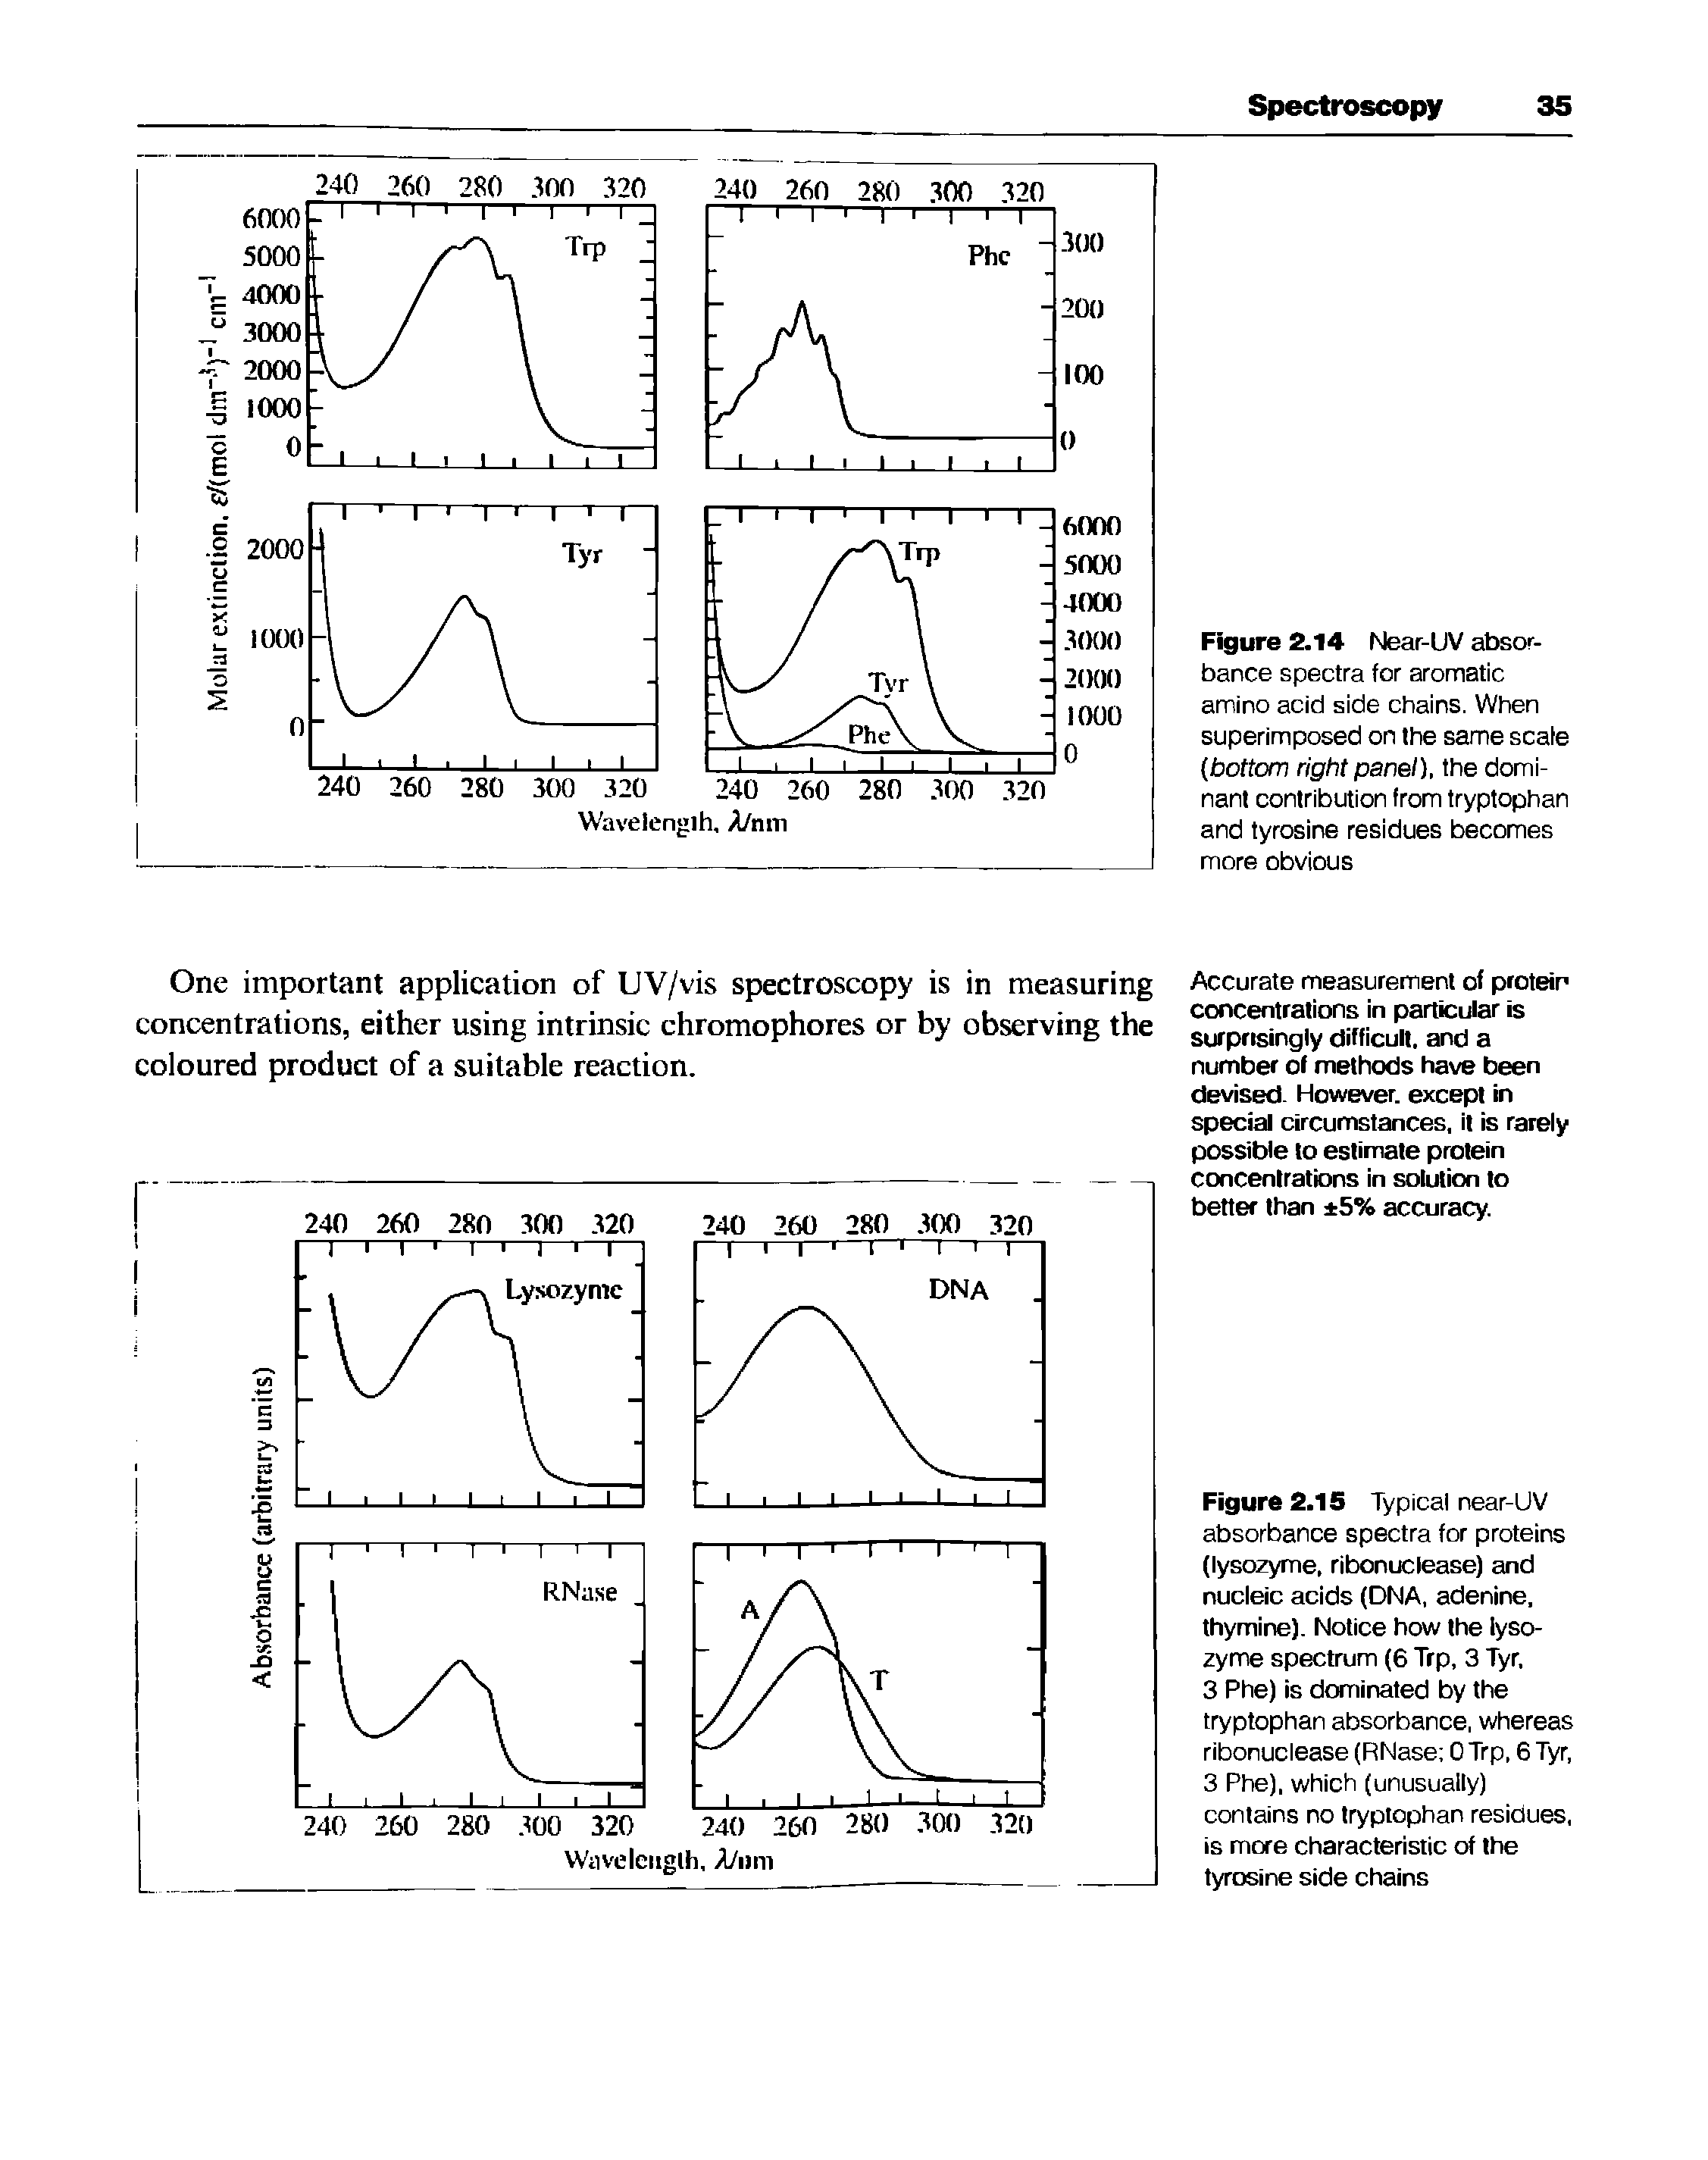 Figure 2.14 Near-UV absorbance spectra for aromatic amino acid side chains. When superimposed on the same scale (bottom right panel), the dominant contribution from tryptophan and tyrosine residues becomes more obvious...